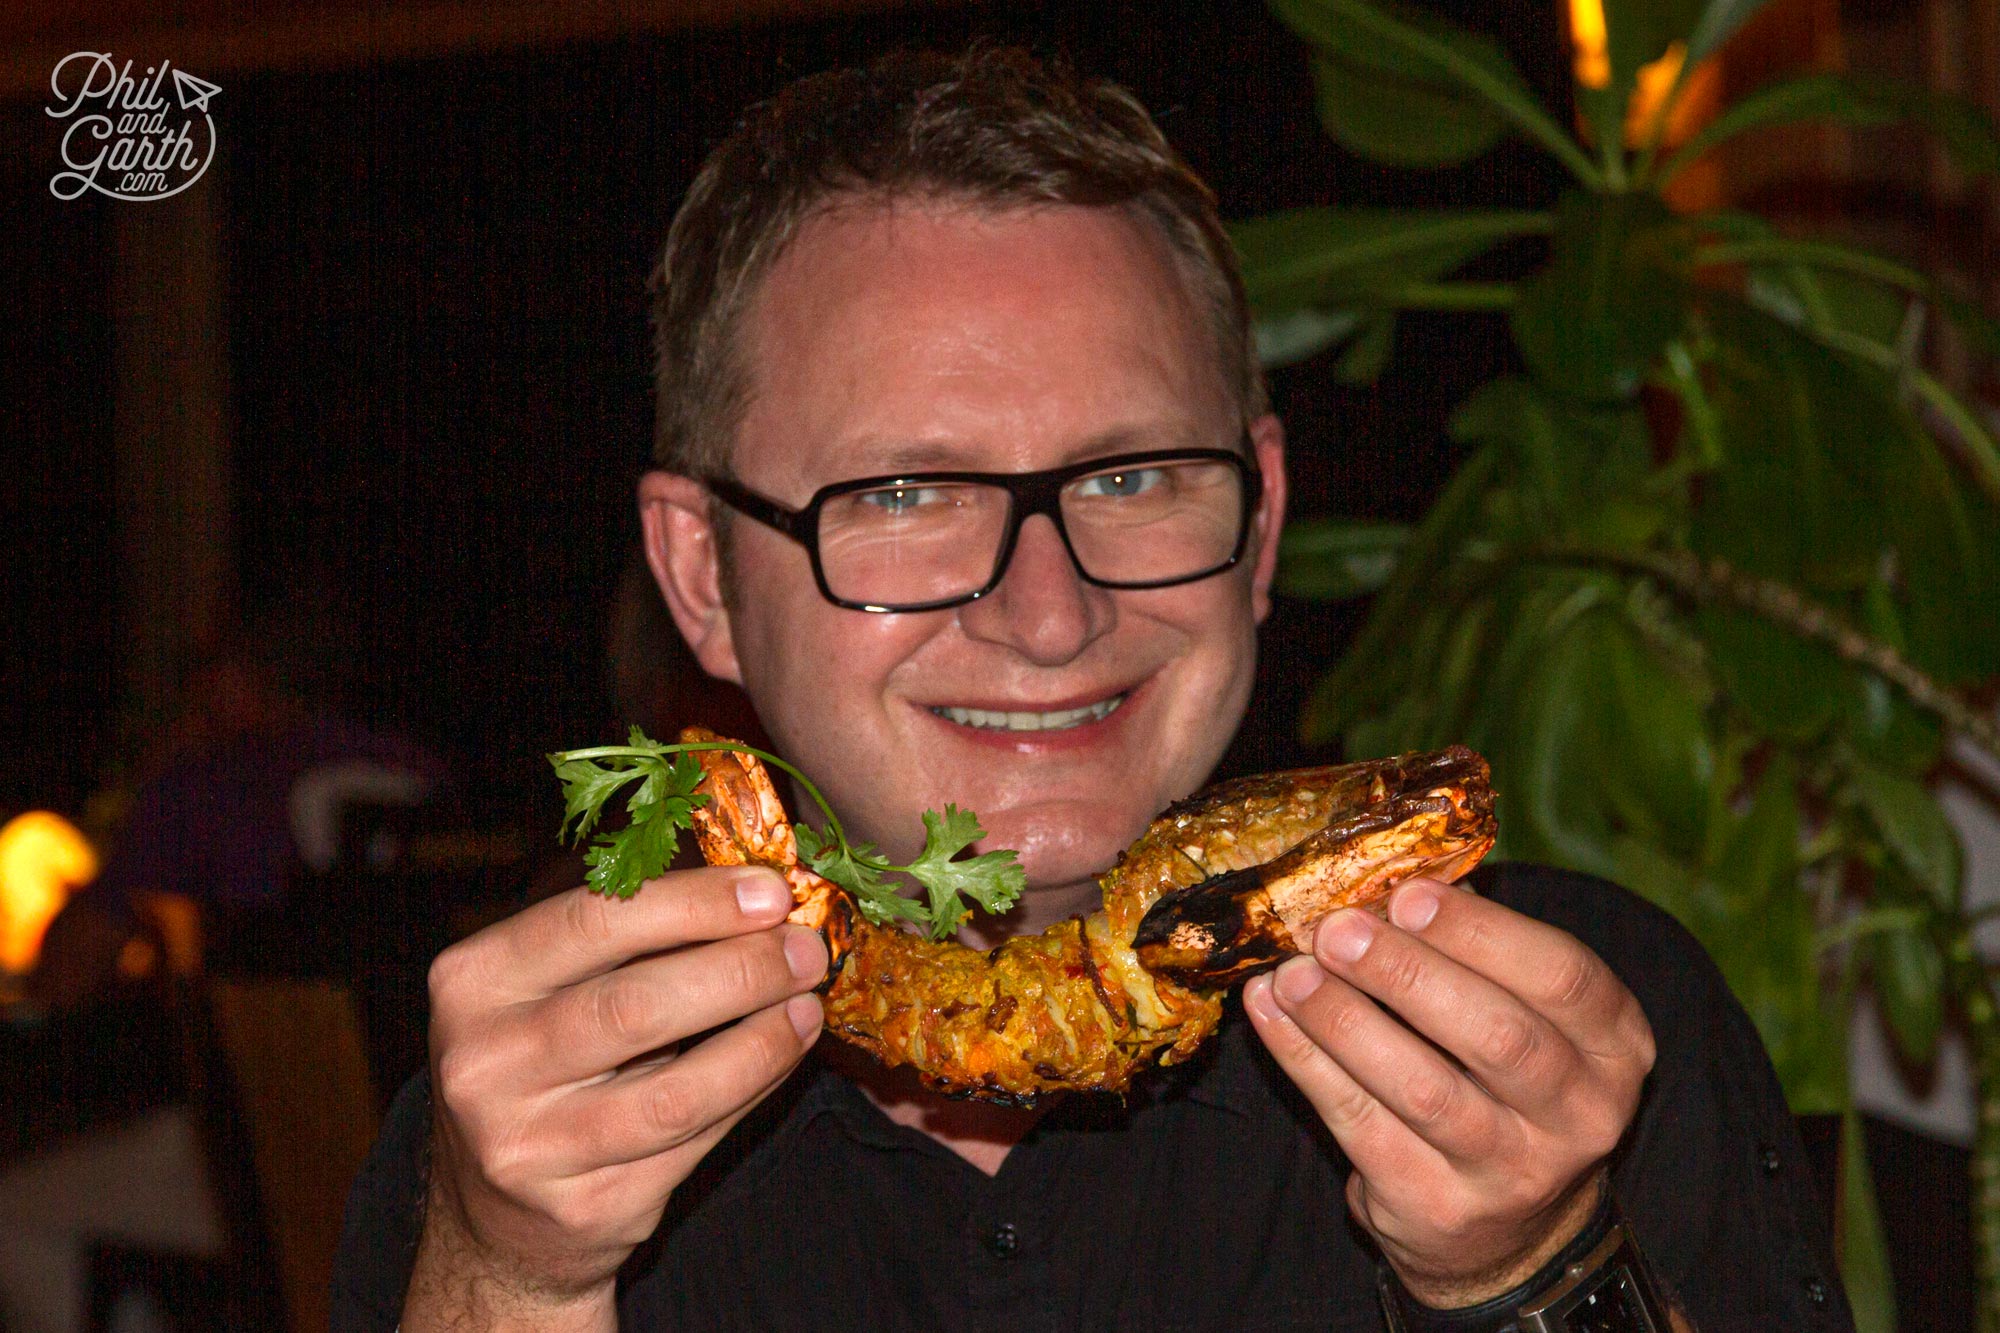 Garth with his enormous grilled prawn